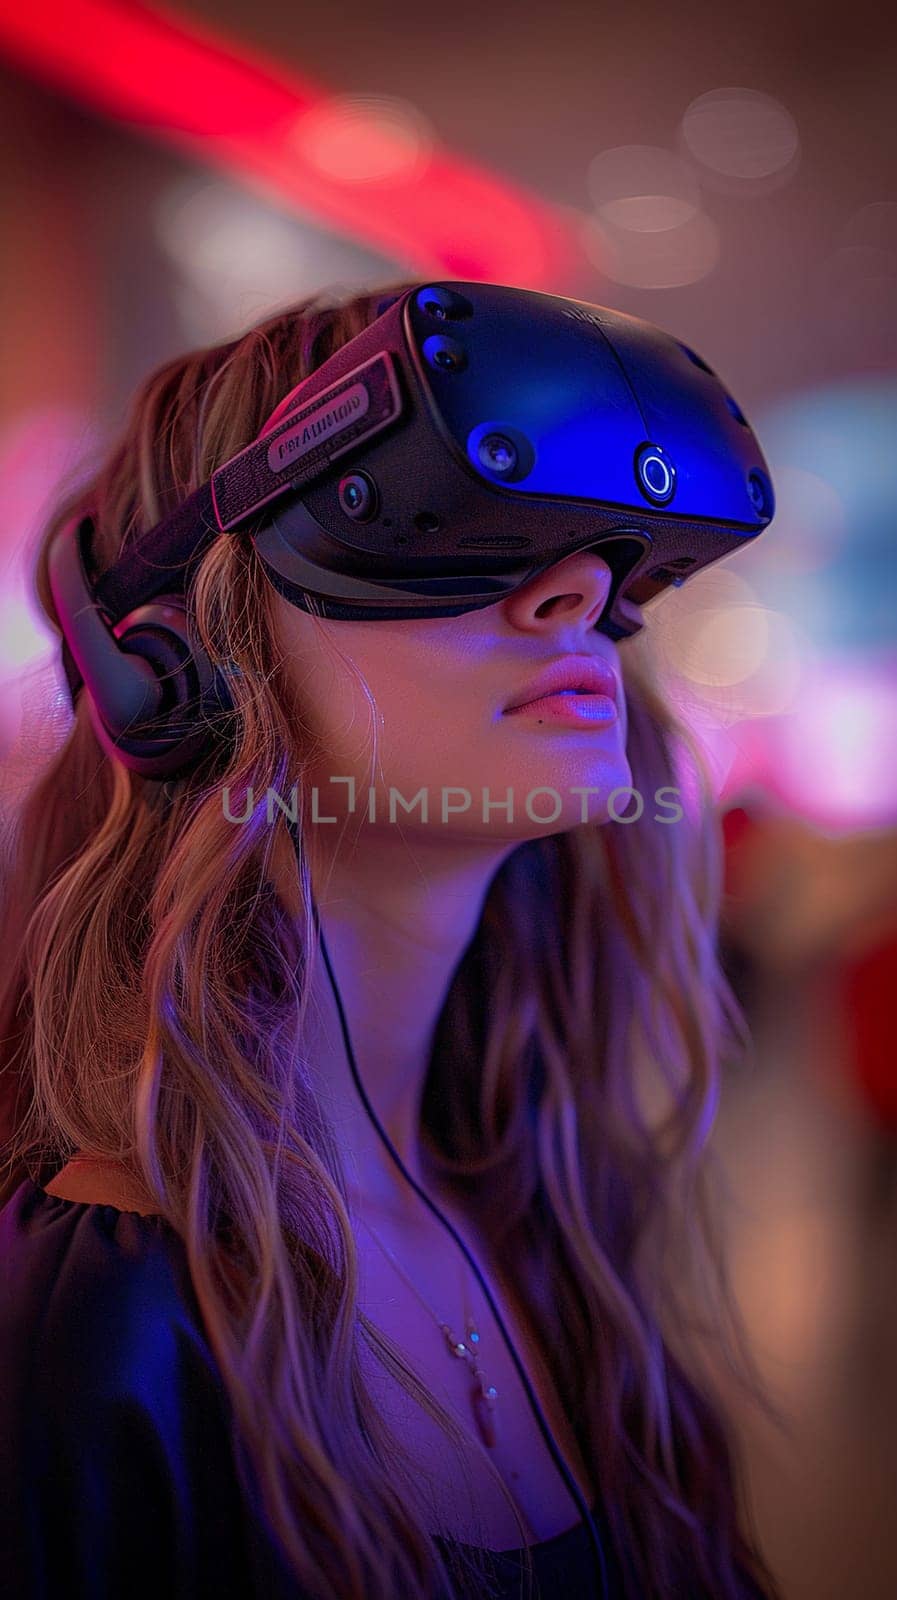 Virtual Reality Gaming Arcade Levels Up in Business of Interactive Entertainment, VR headsets and gamers populate a story of immersion and innovation in business.